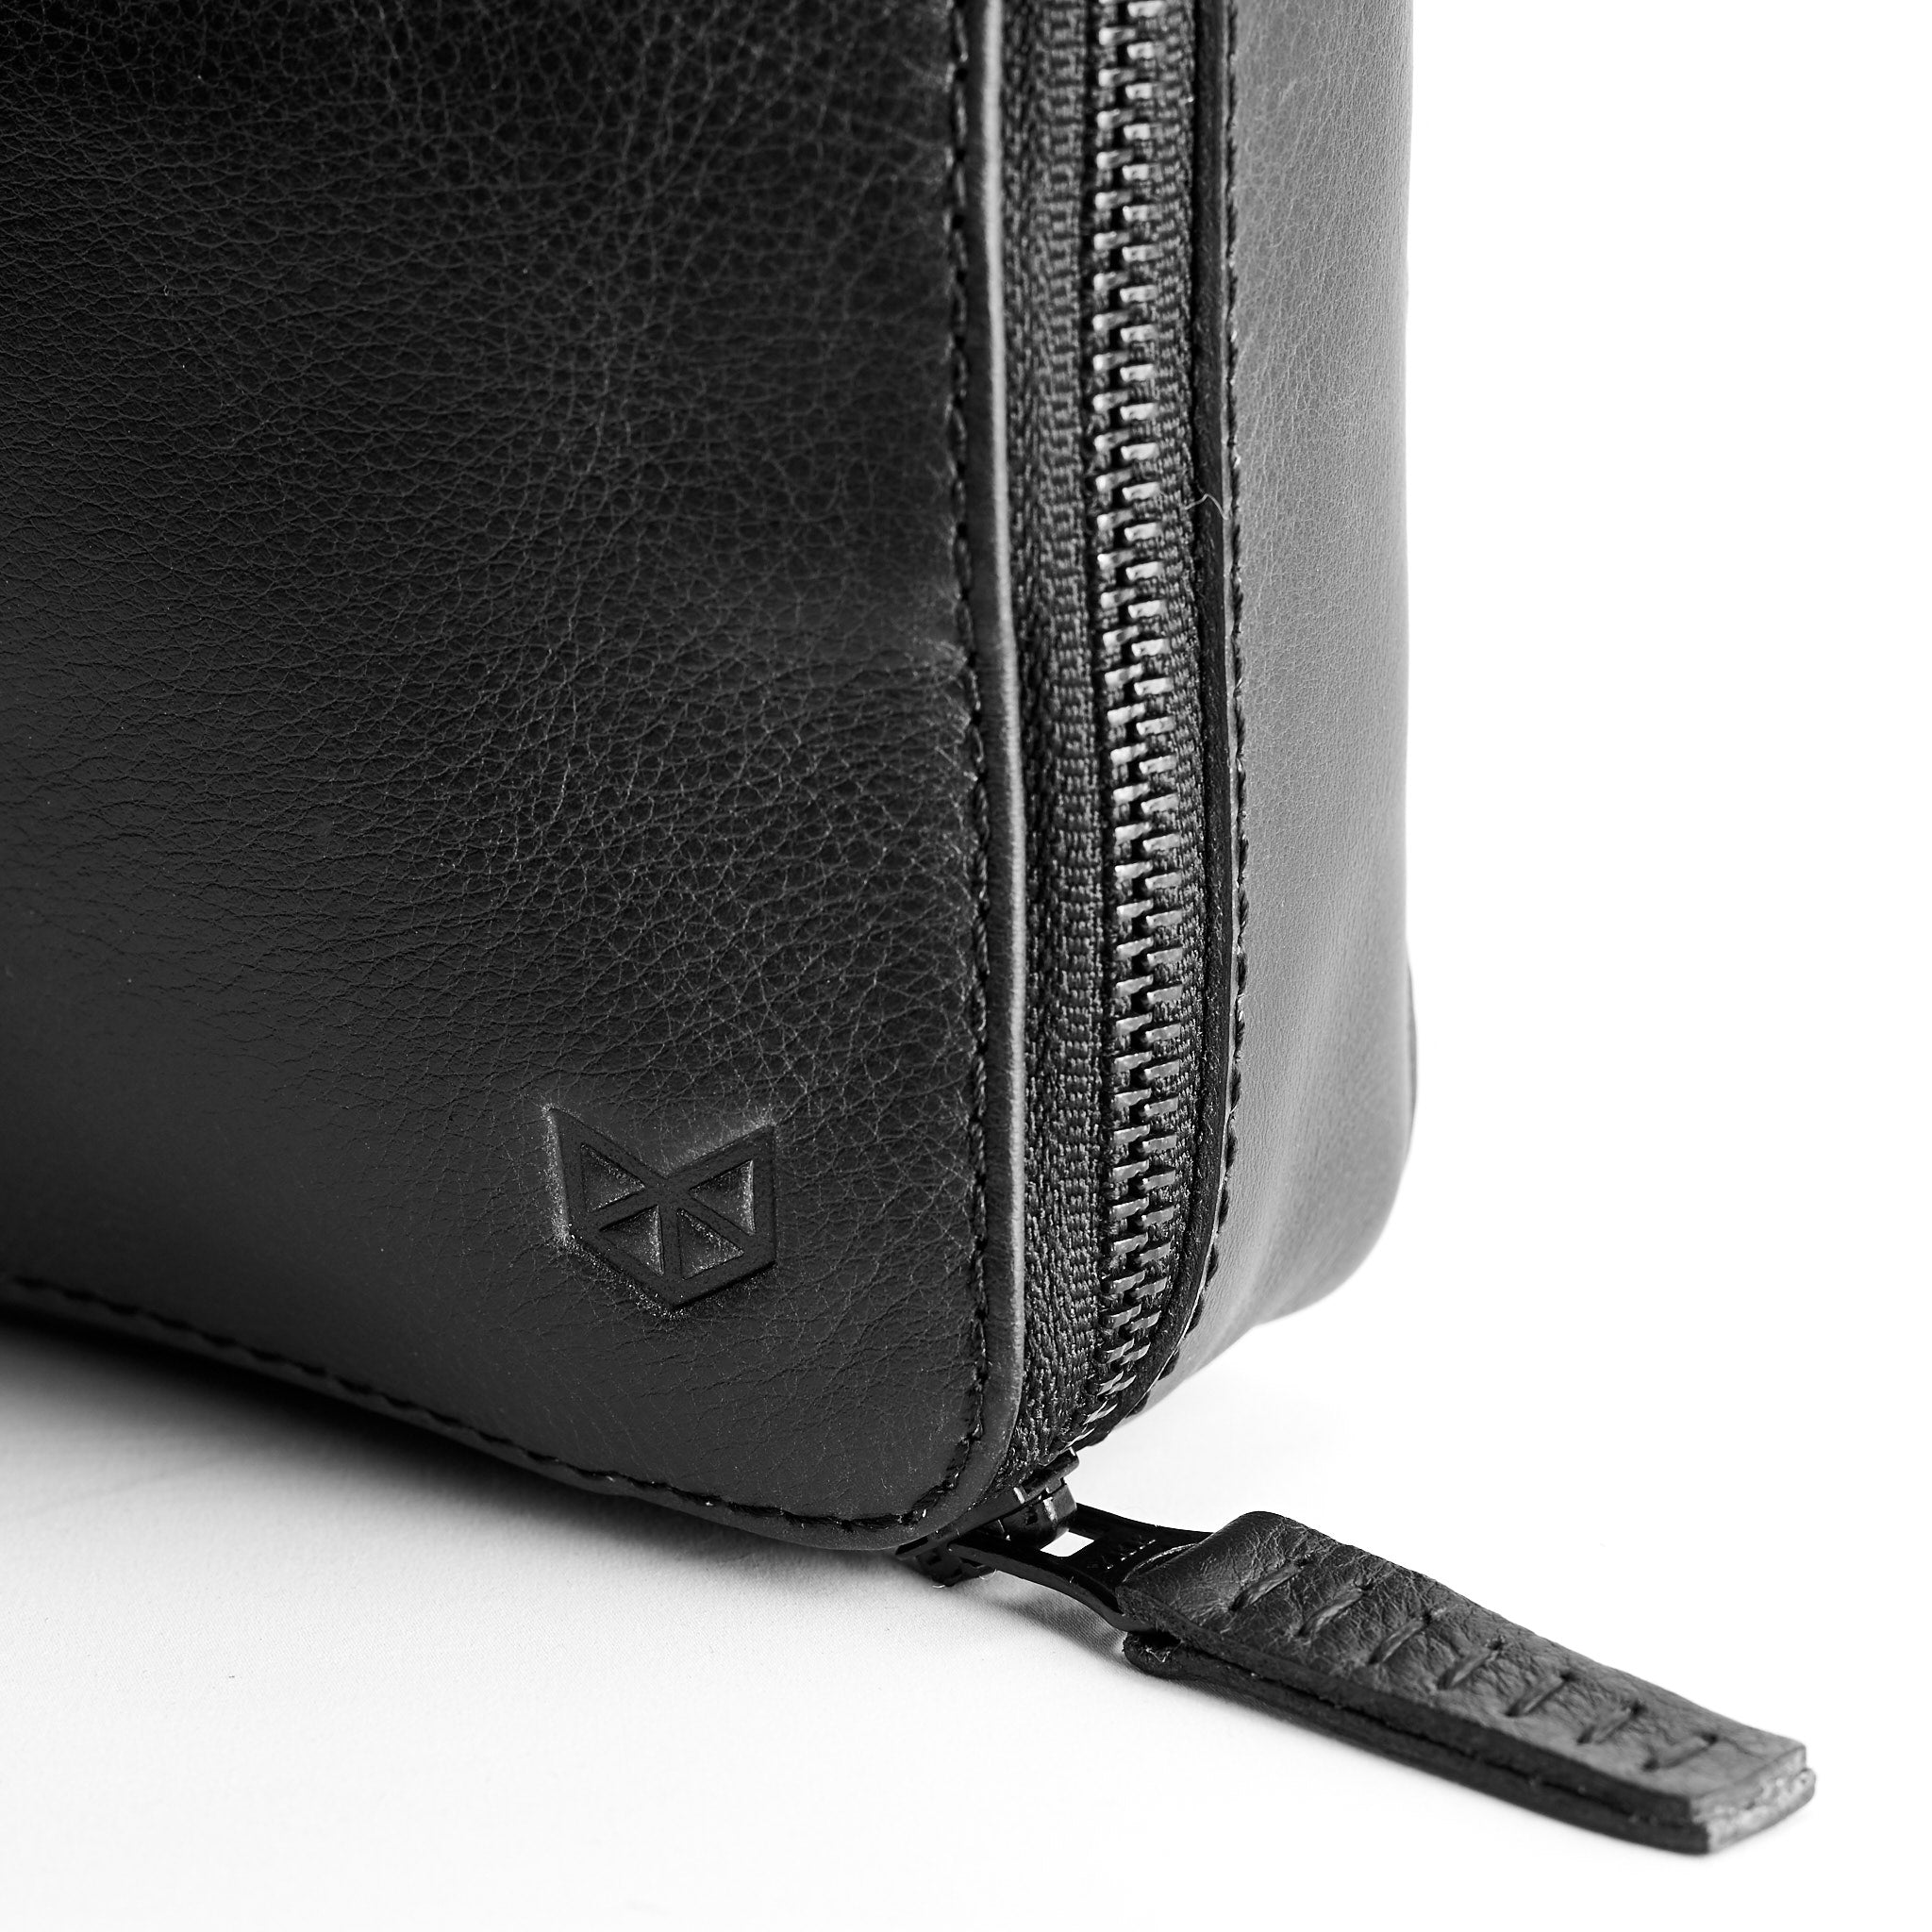 Tech Gear Pouches & Gear Bags by Capra Leather